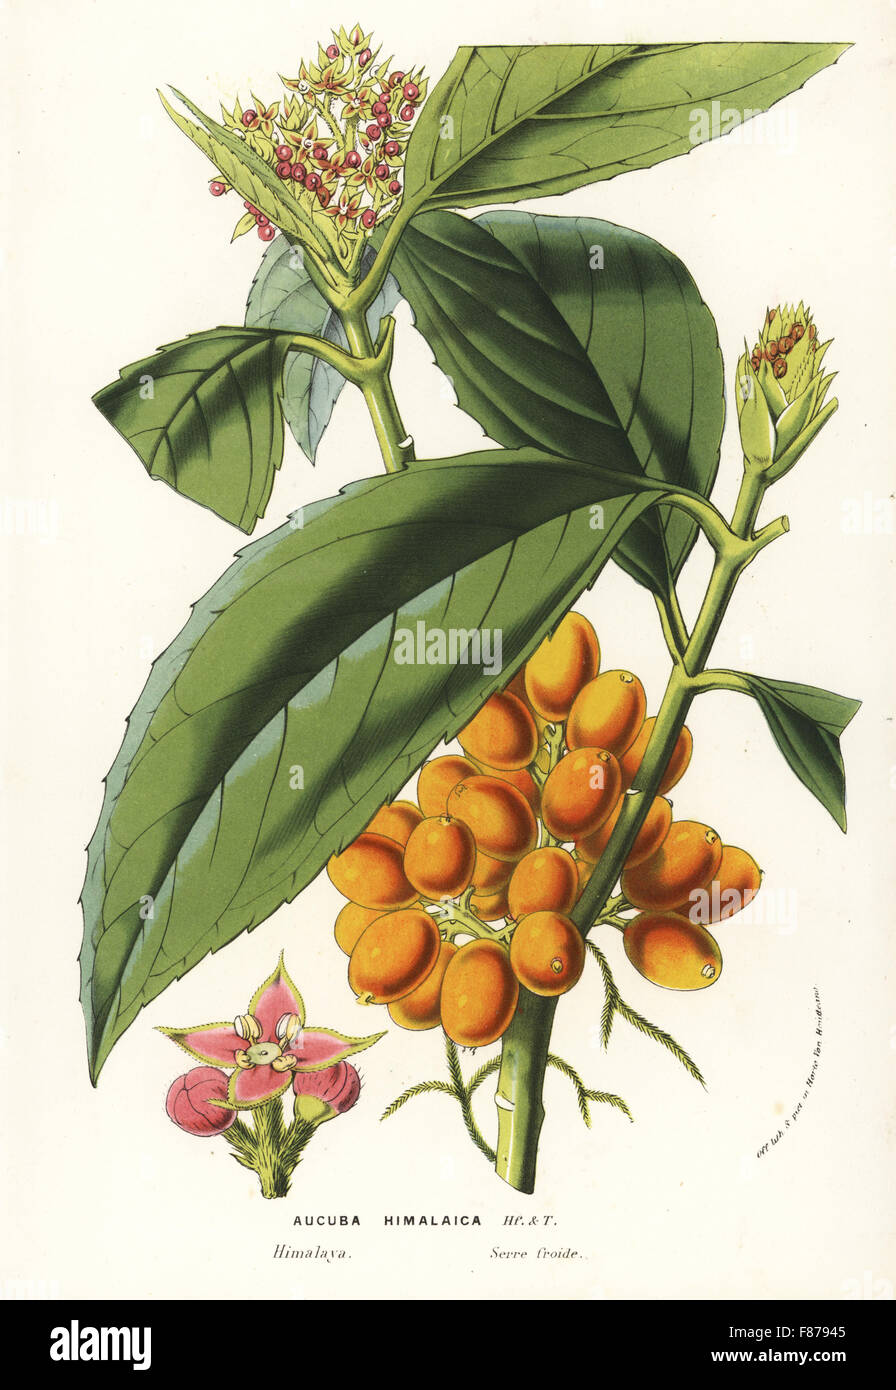 Himalayan aucuba or aokiba, Aucuba himalaica. Handcoloured lithograph from Louis van Houtte and Charles Lemaire's Flowers of the Gardens and Hothouses of Europe, Flore des Serres et des Jardins de l'Europe, Ghent, Belgium, 1857. Stock Photo